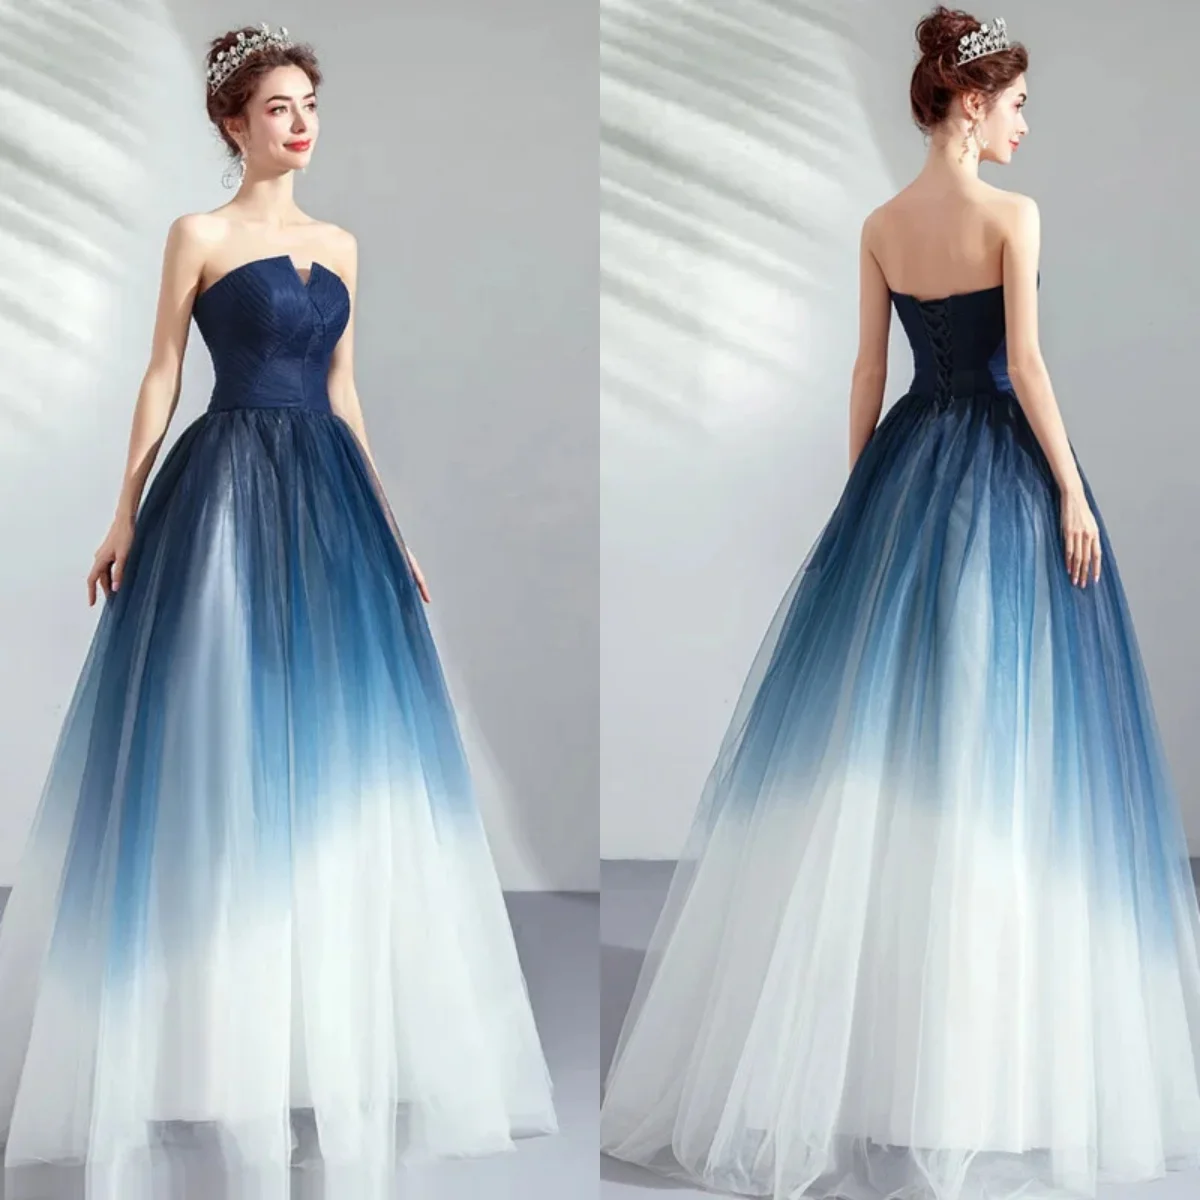 

Evening Dresses Blue Satin Tulle Pleat Sleeveless Strapless Lace up A-Line Floor Length Plus Size Women Party Formal Gowns E263